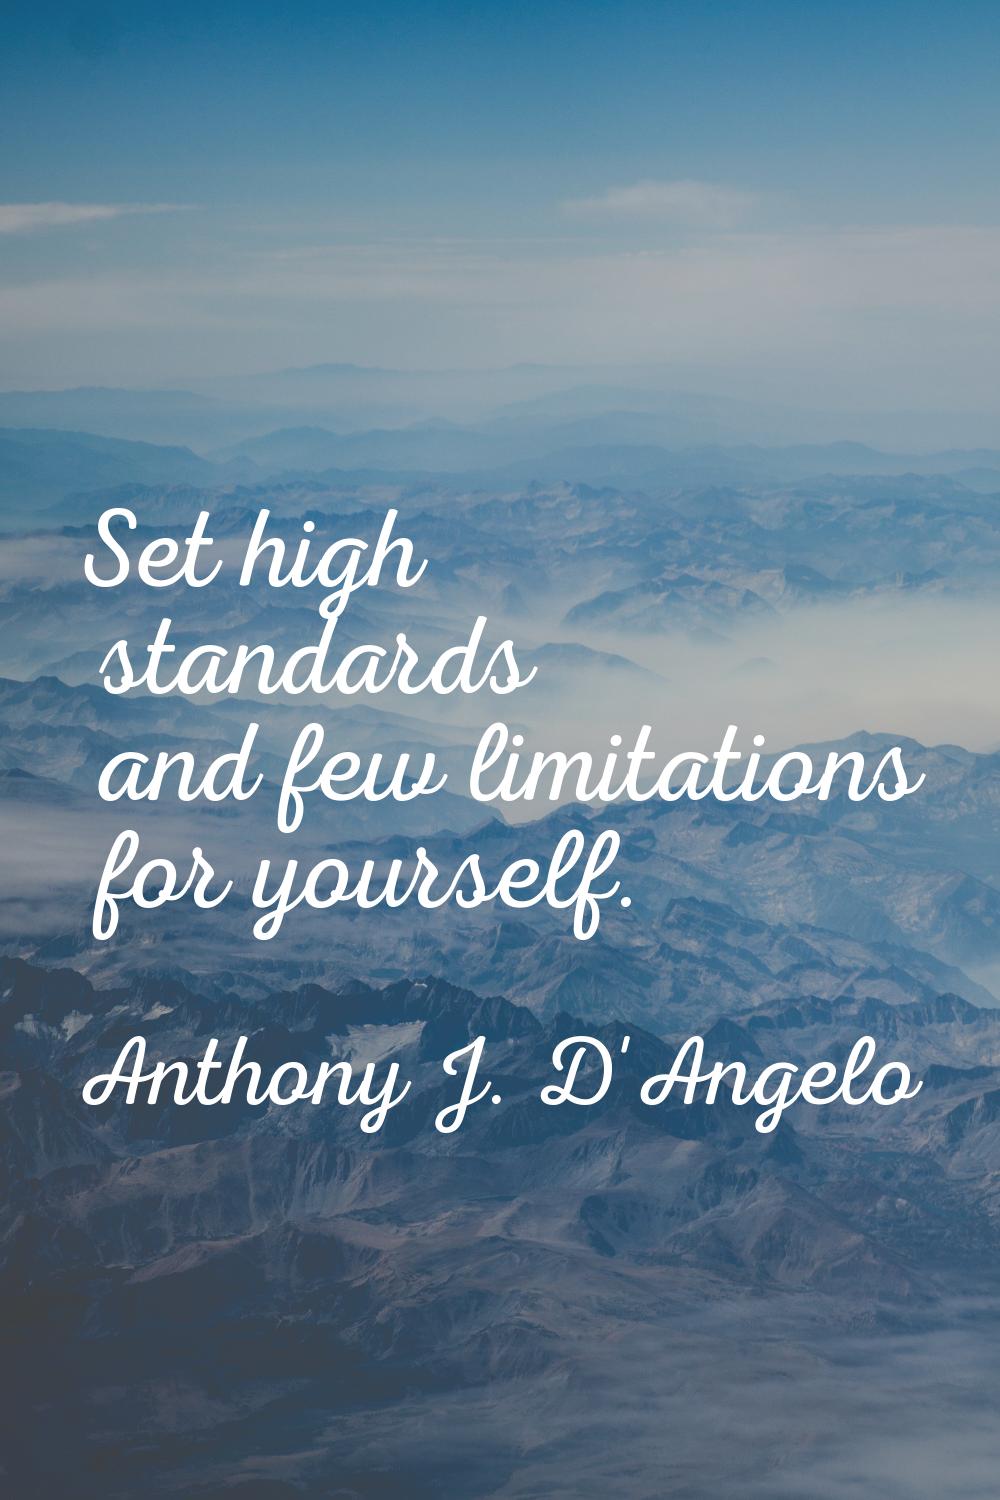 Set high standards and few limitations for yourself.